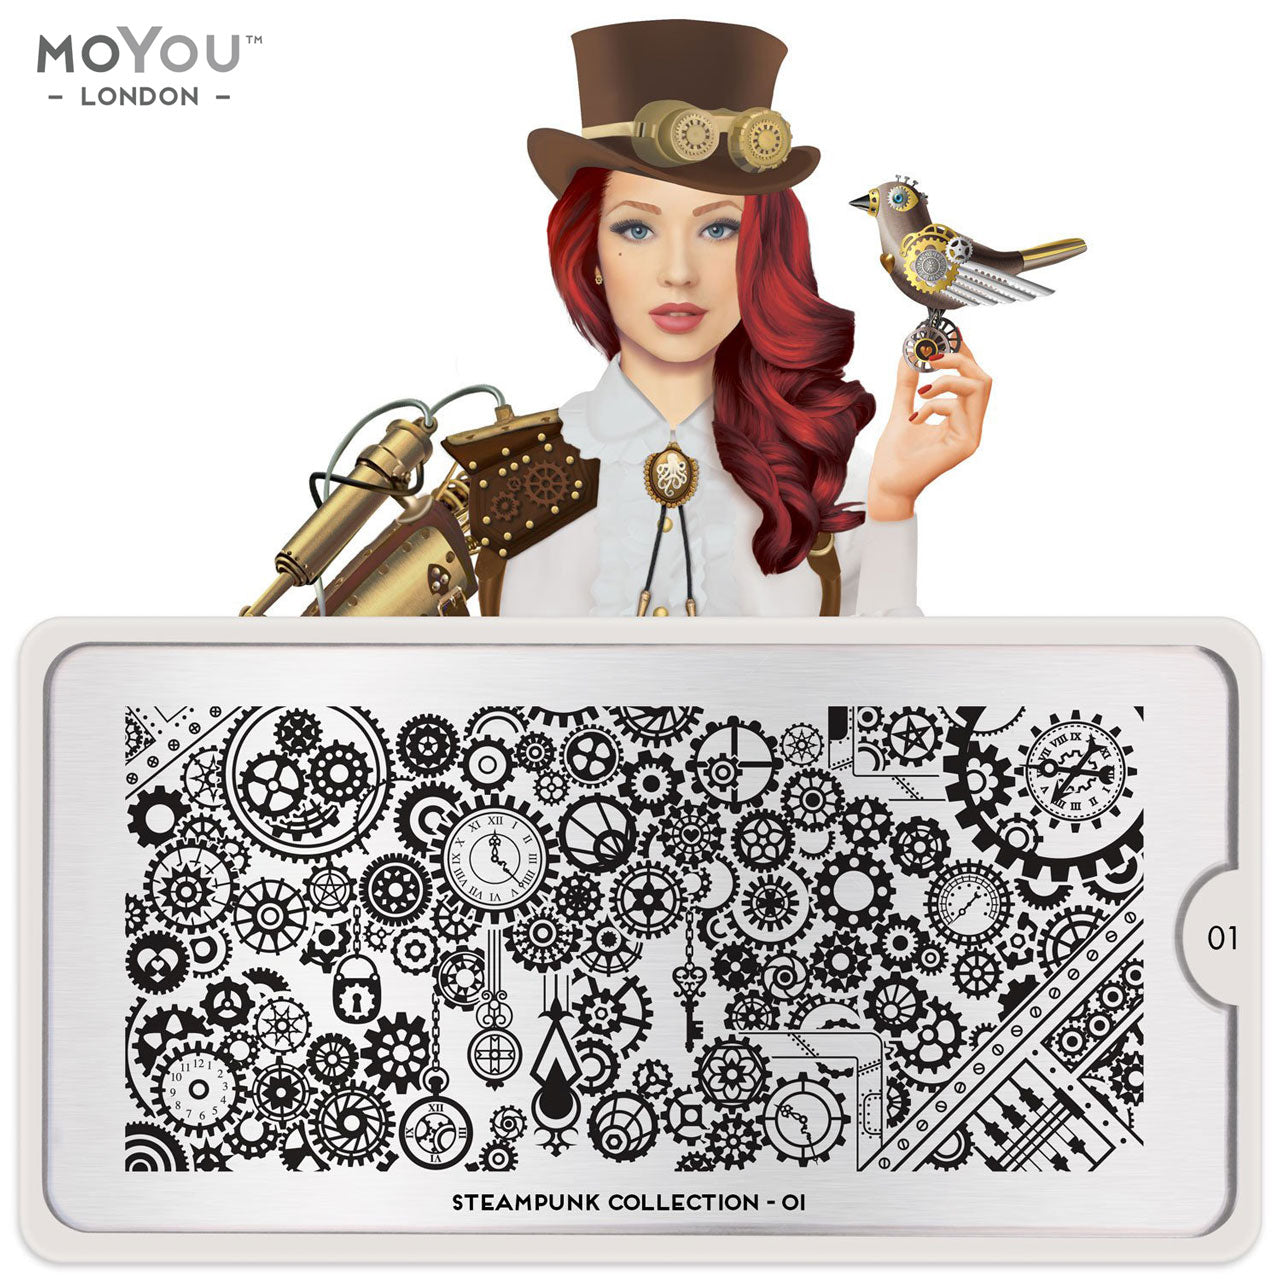 Plaque Stamping Steampunk 01 - MoYou London